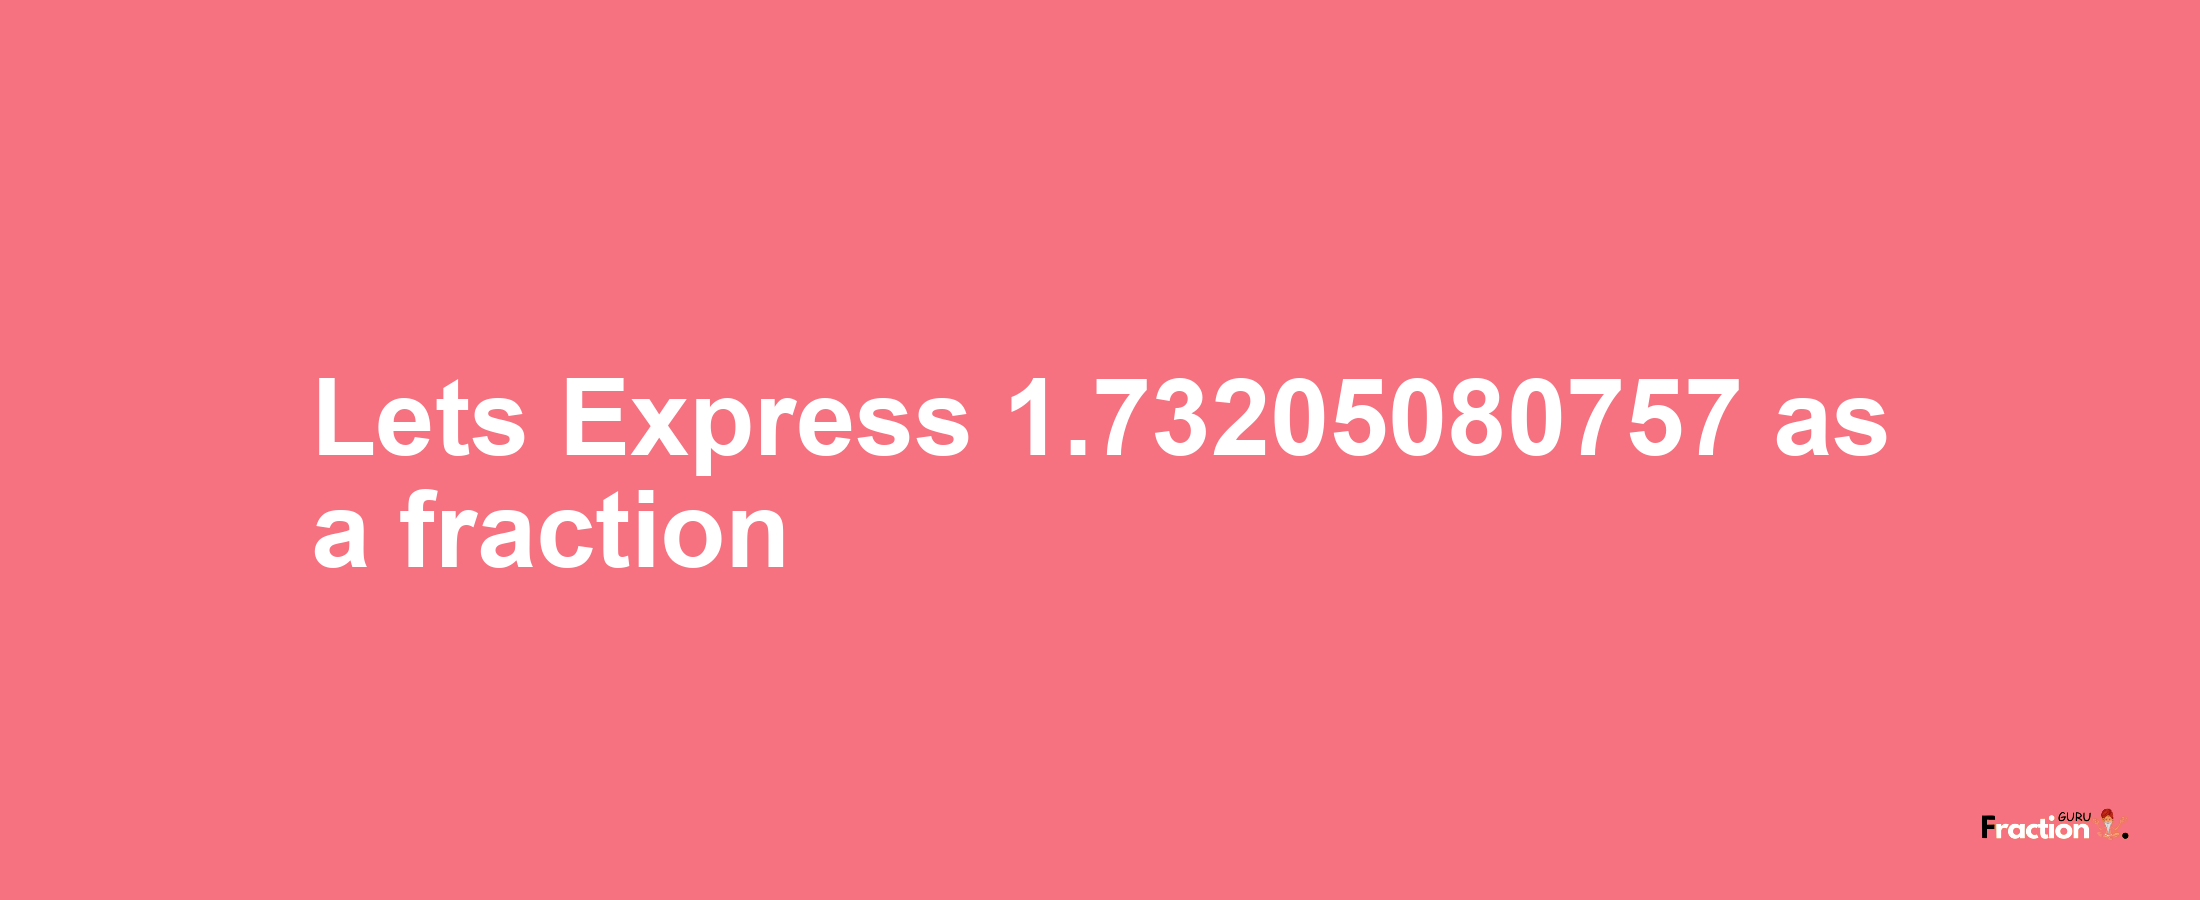 Lets Express 1.73205080757 as afraction